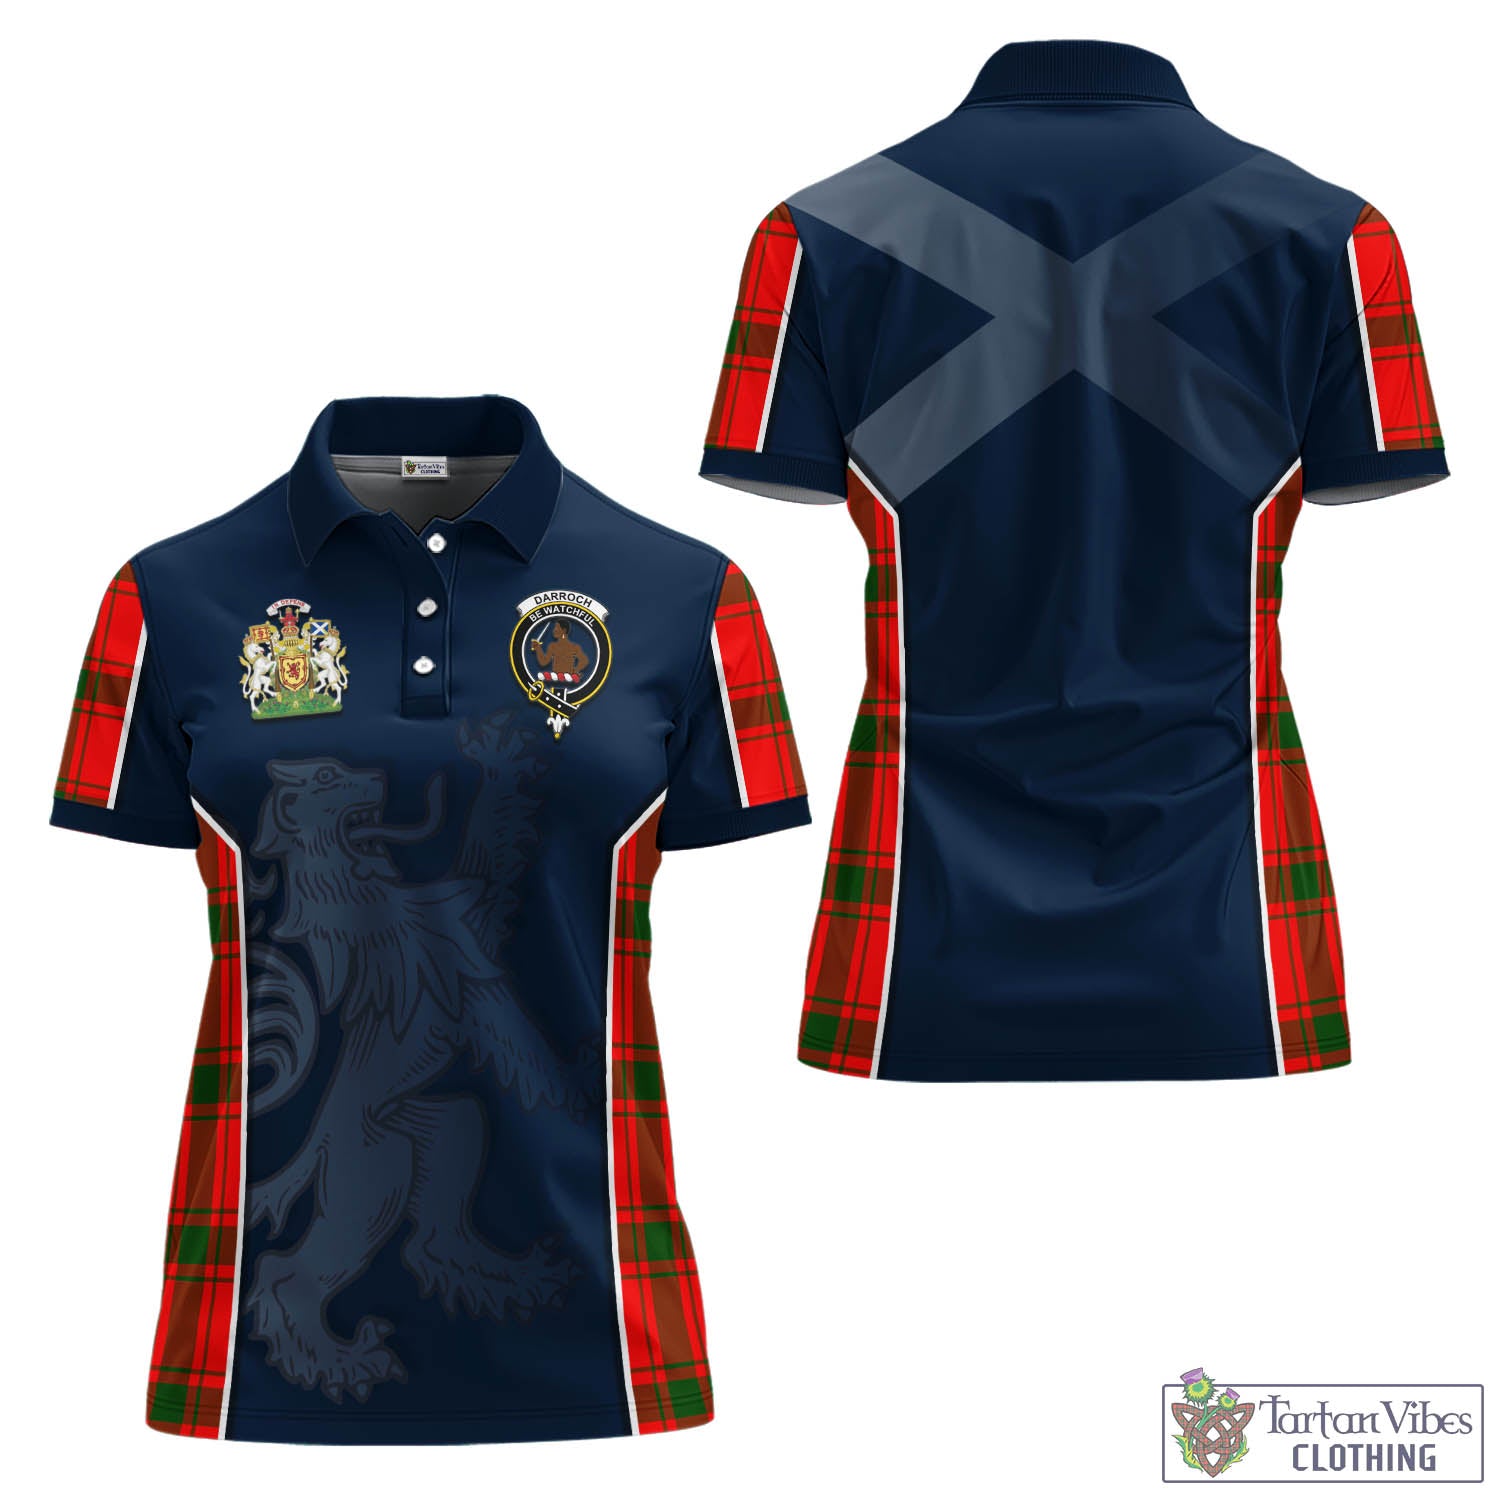 Tartan Vibes Clothing Darroch Tartan Women's Polo Shirt with Family Crest and Lion Rampant Vibes Sport Style